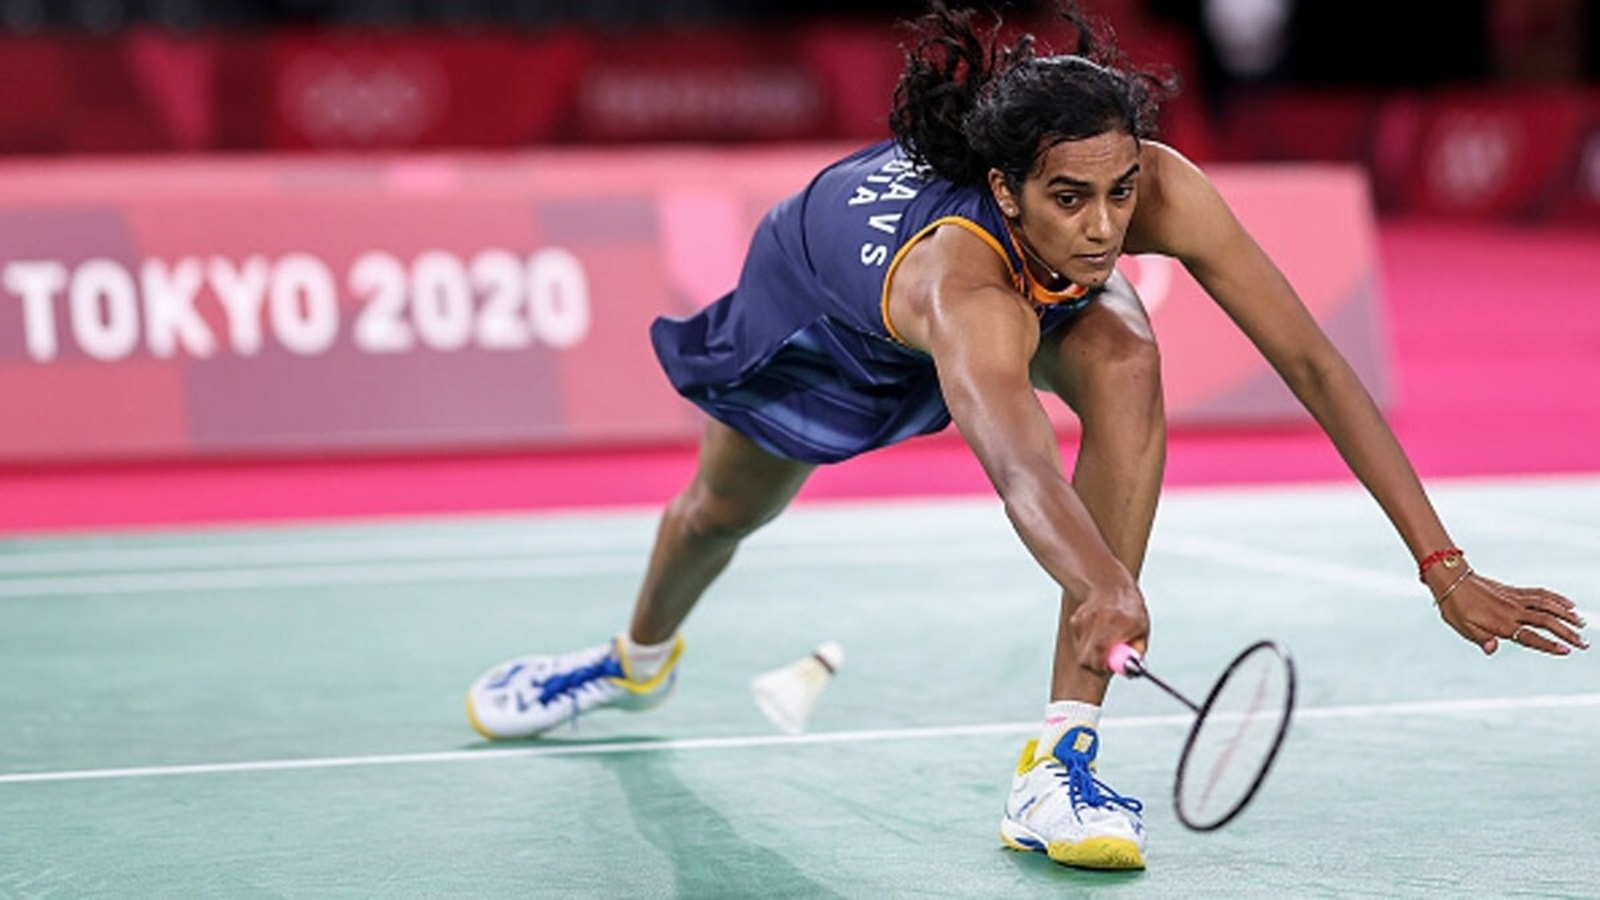 Tokyo Olympics 2020 PV Sindhu loses semi-final to Tai Tzu-Ying, to compete for bronze medal Olympics